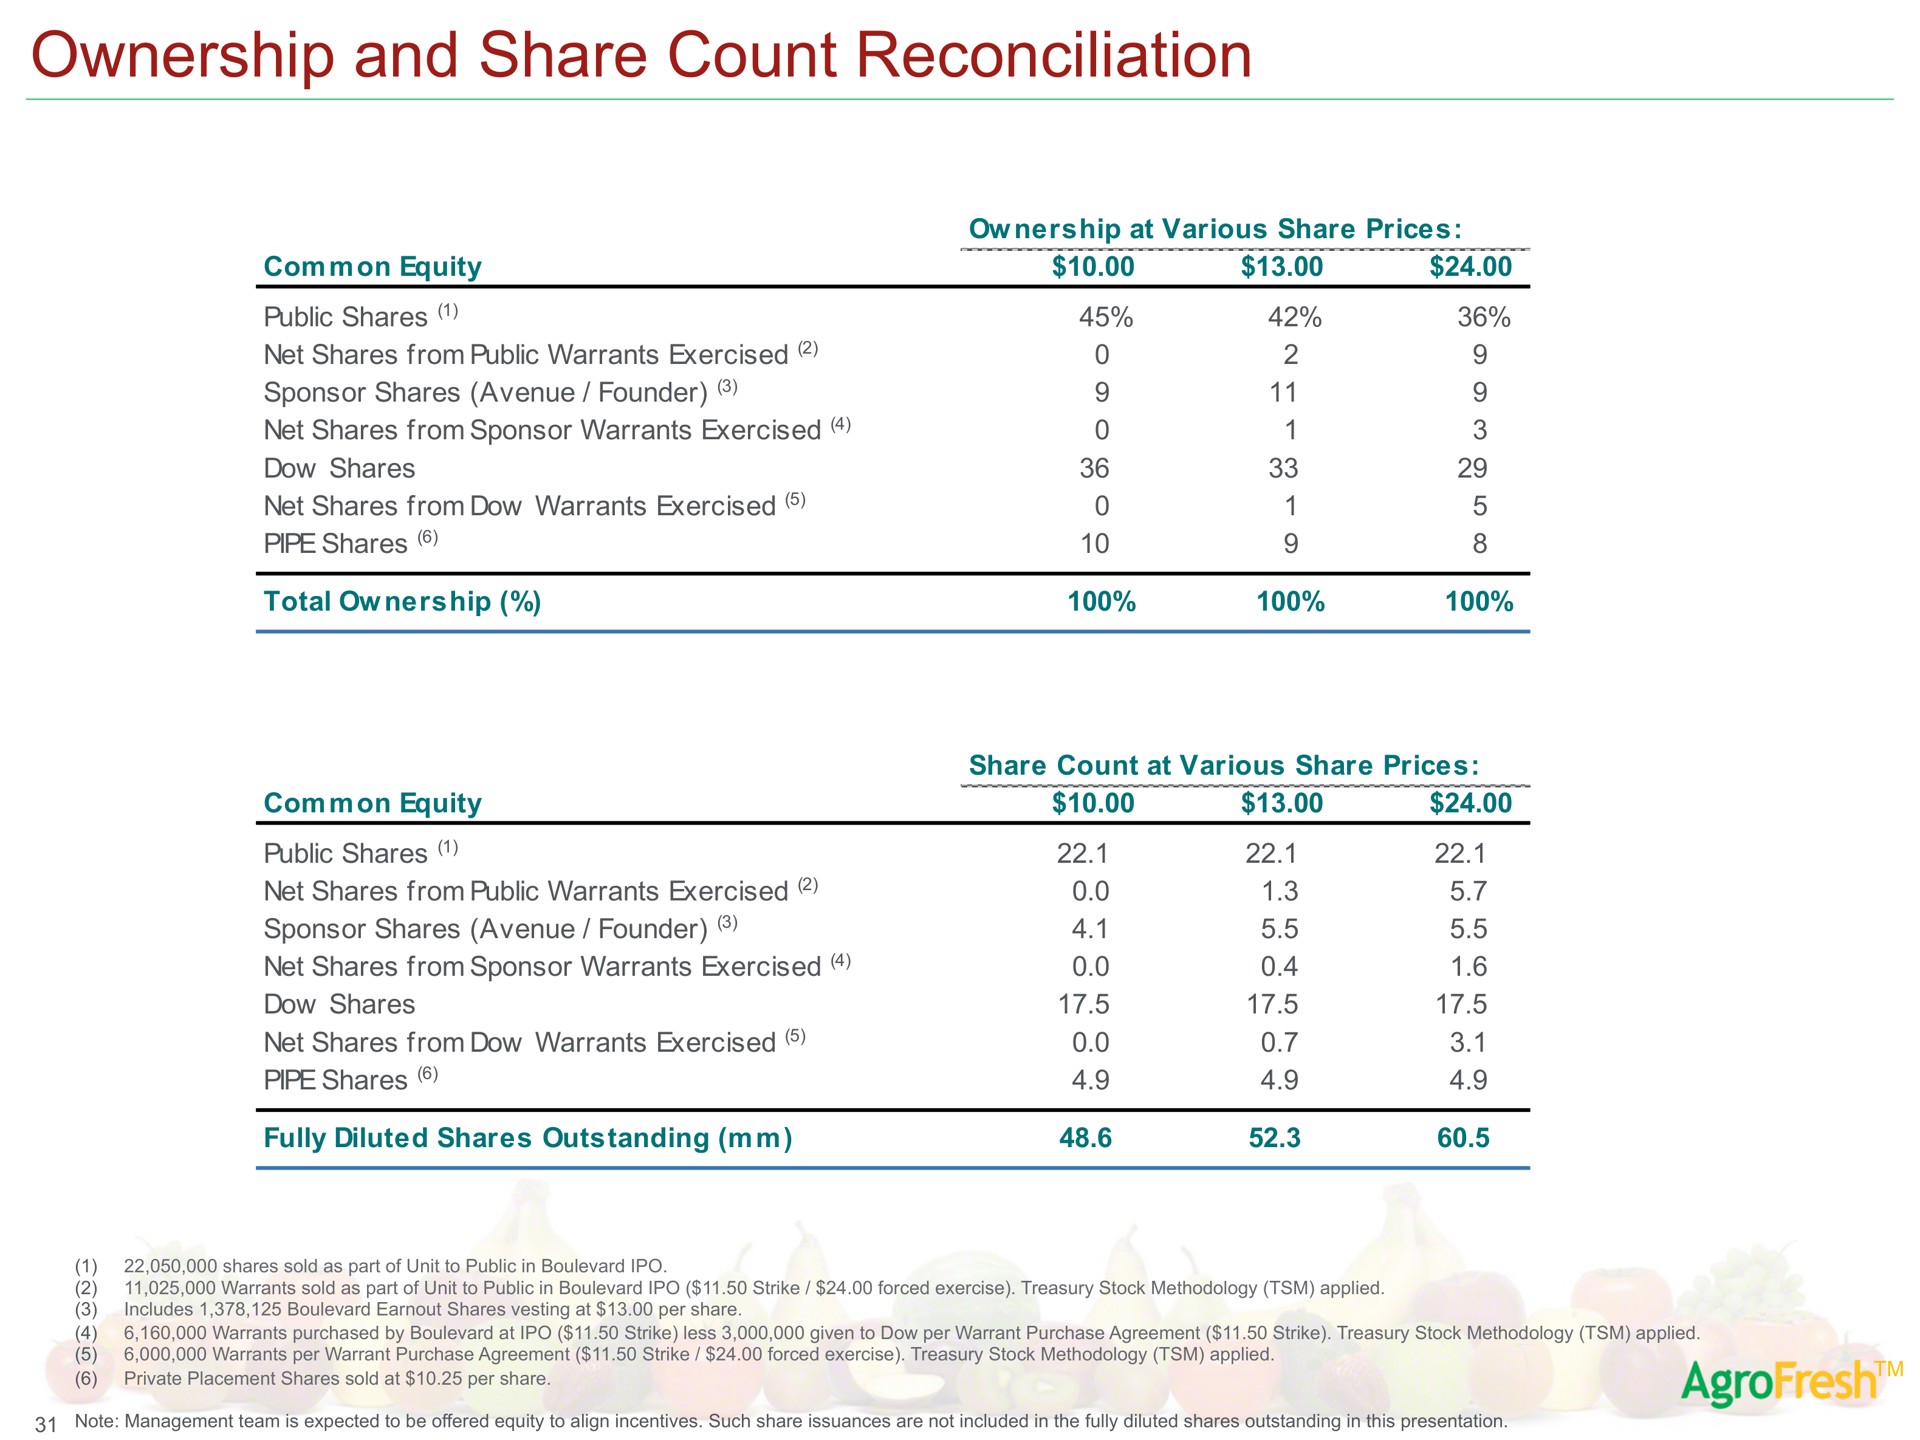 ownership and share count reconciliation | AgroFresh